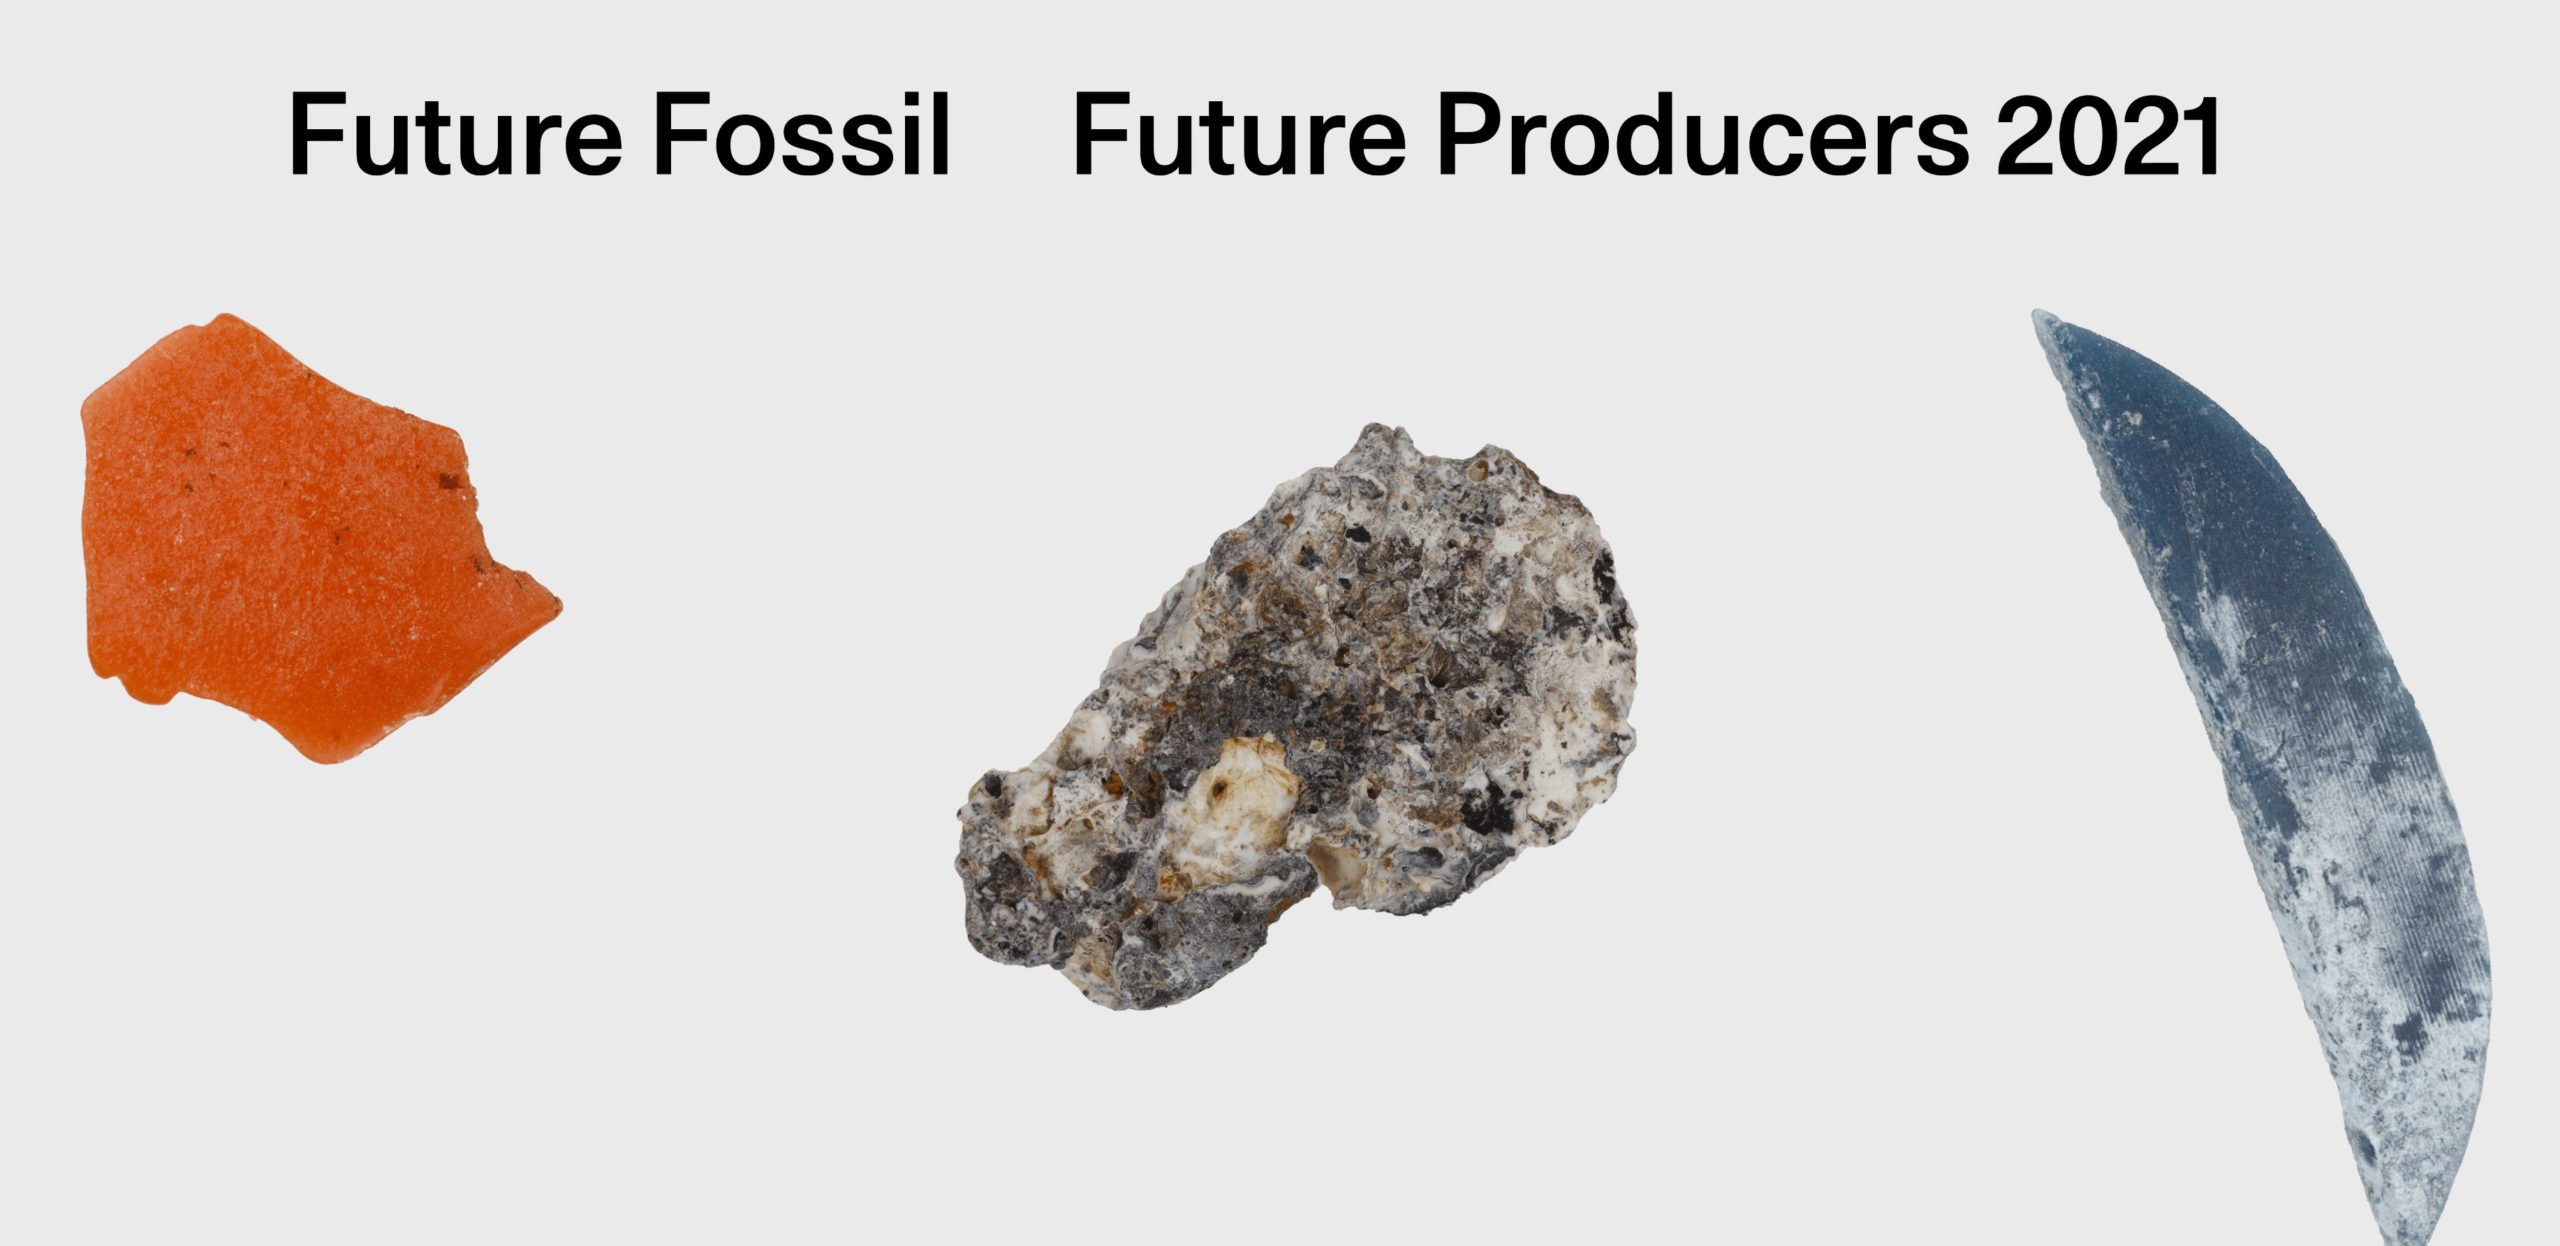 Future Fossil launches Future Producers competition